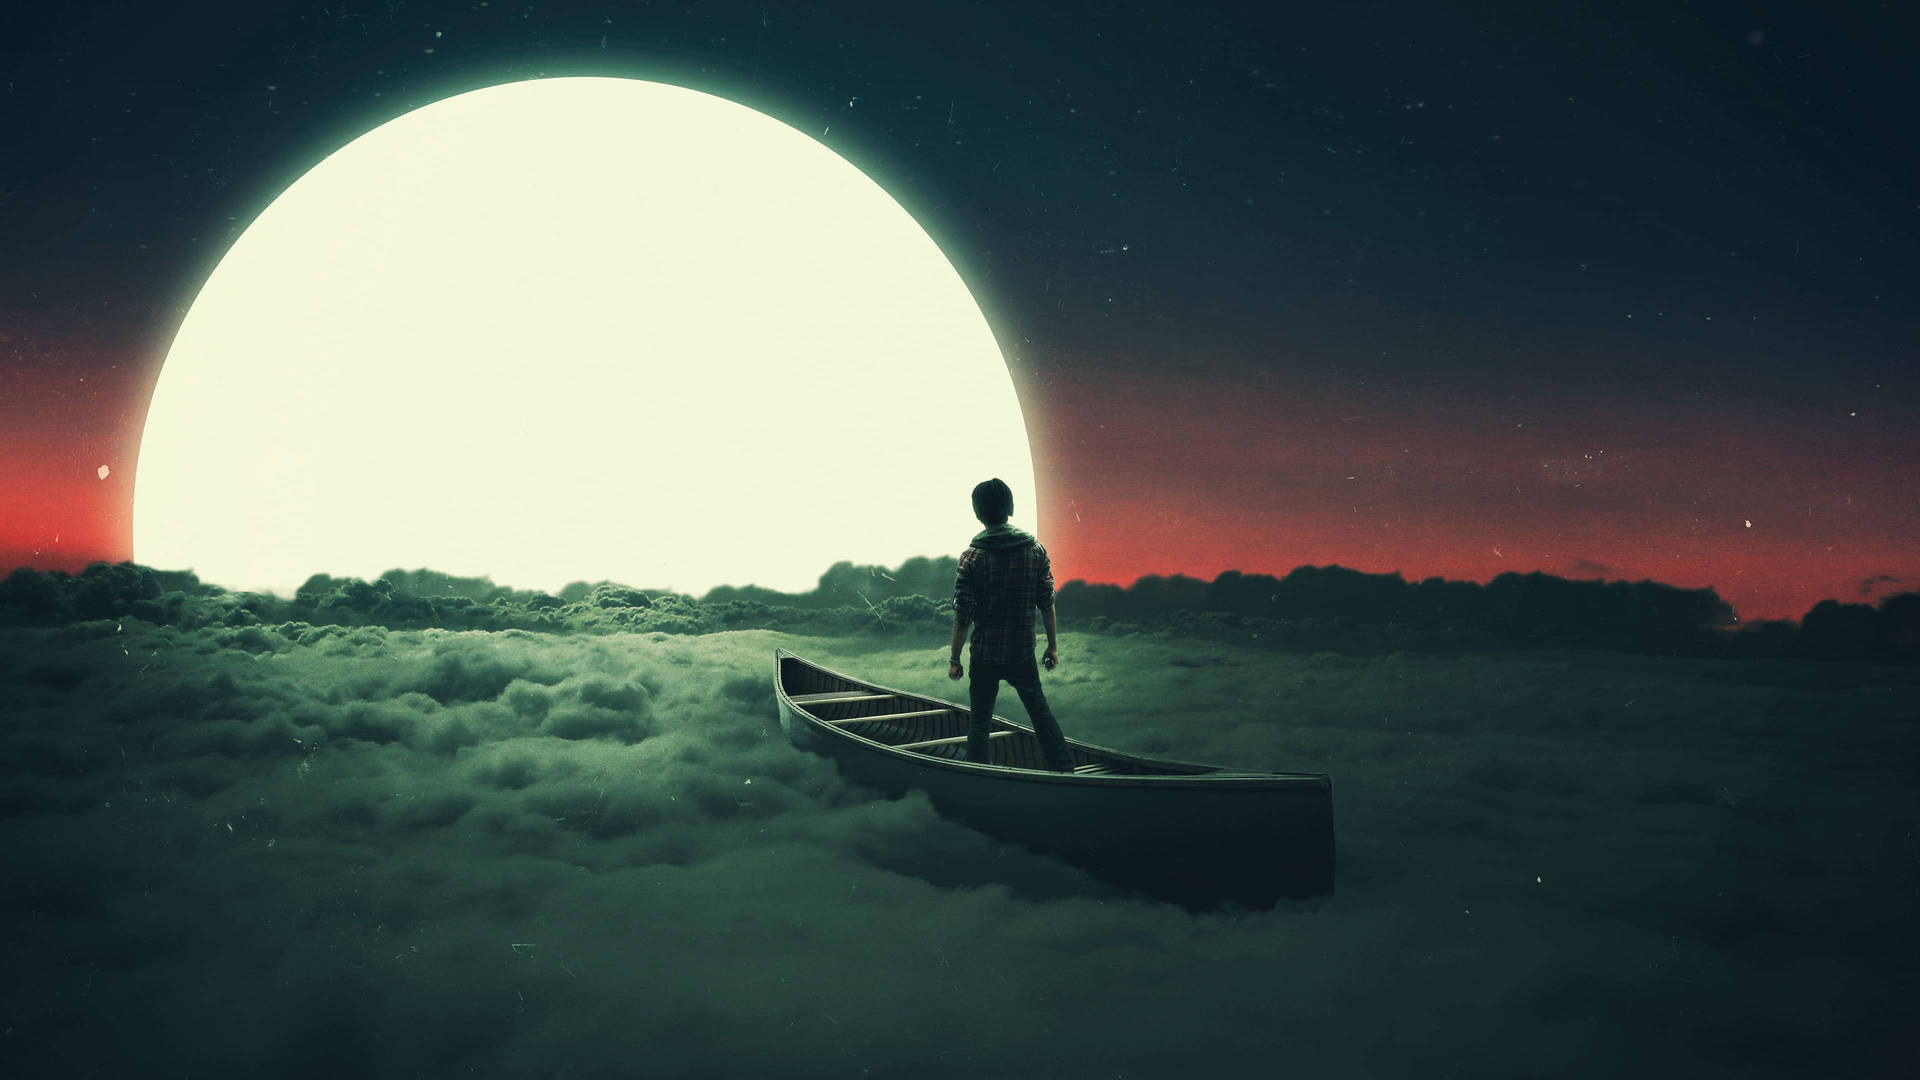 "A boy takes in the beauty of the clouds while boating in Lucid." Wallpaper